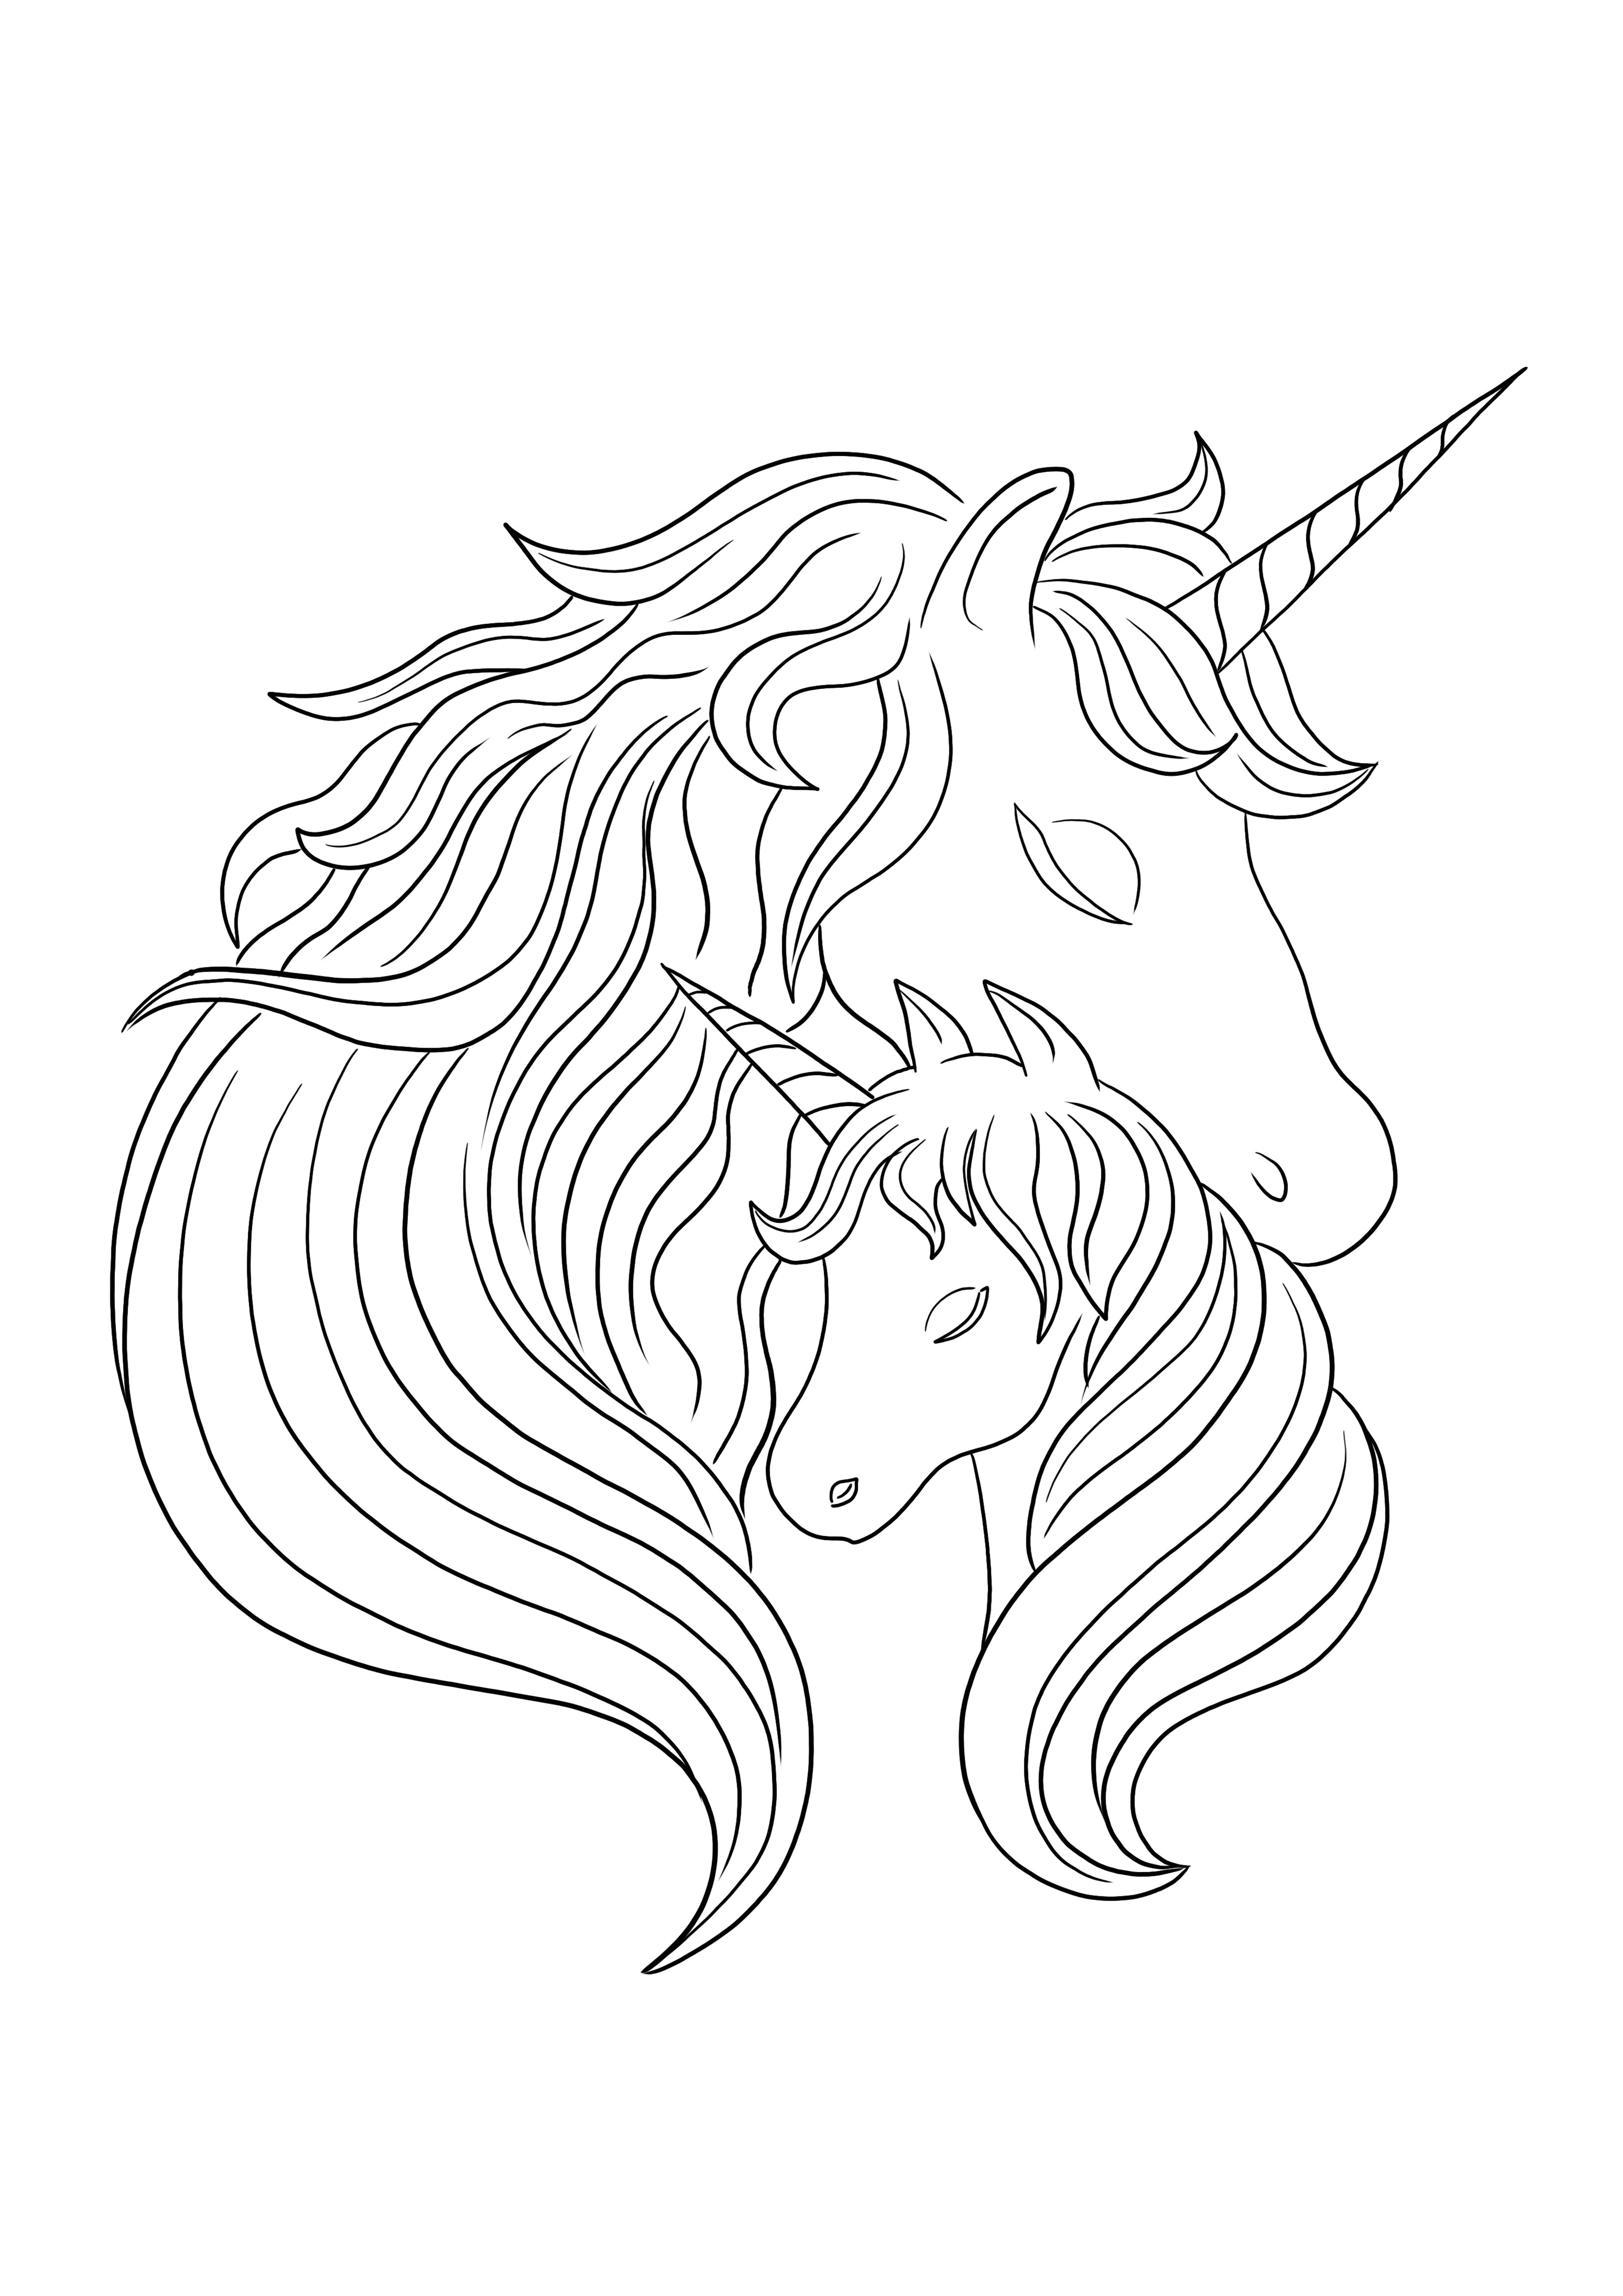 Mother and baby unicorn-free printable coloring page for kids